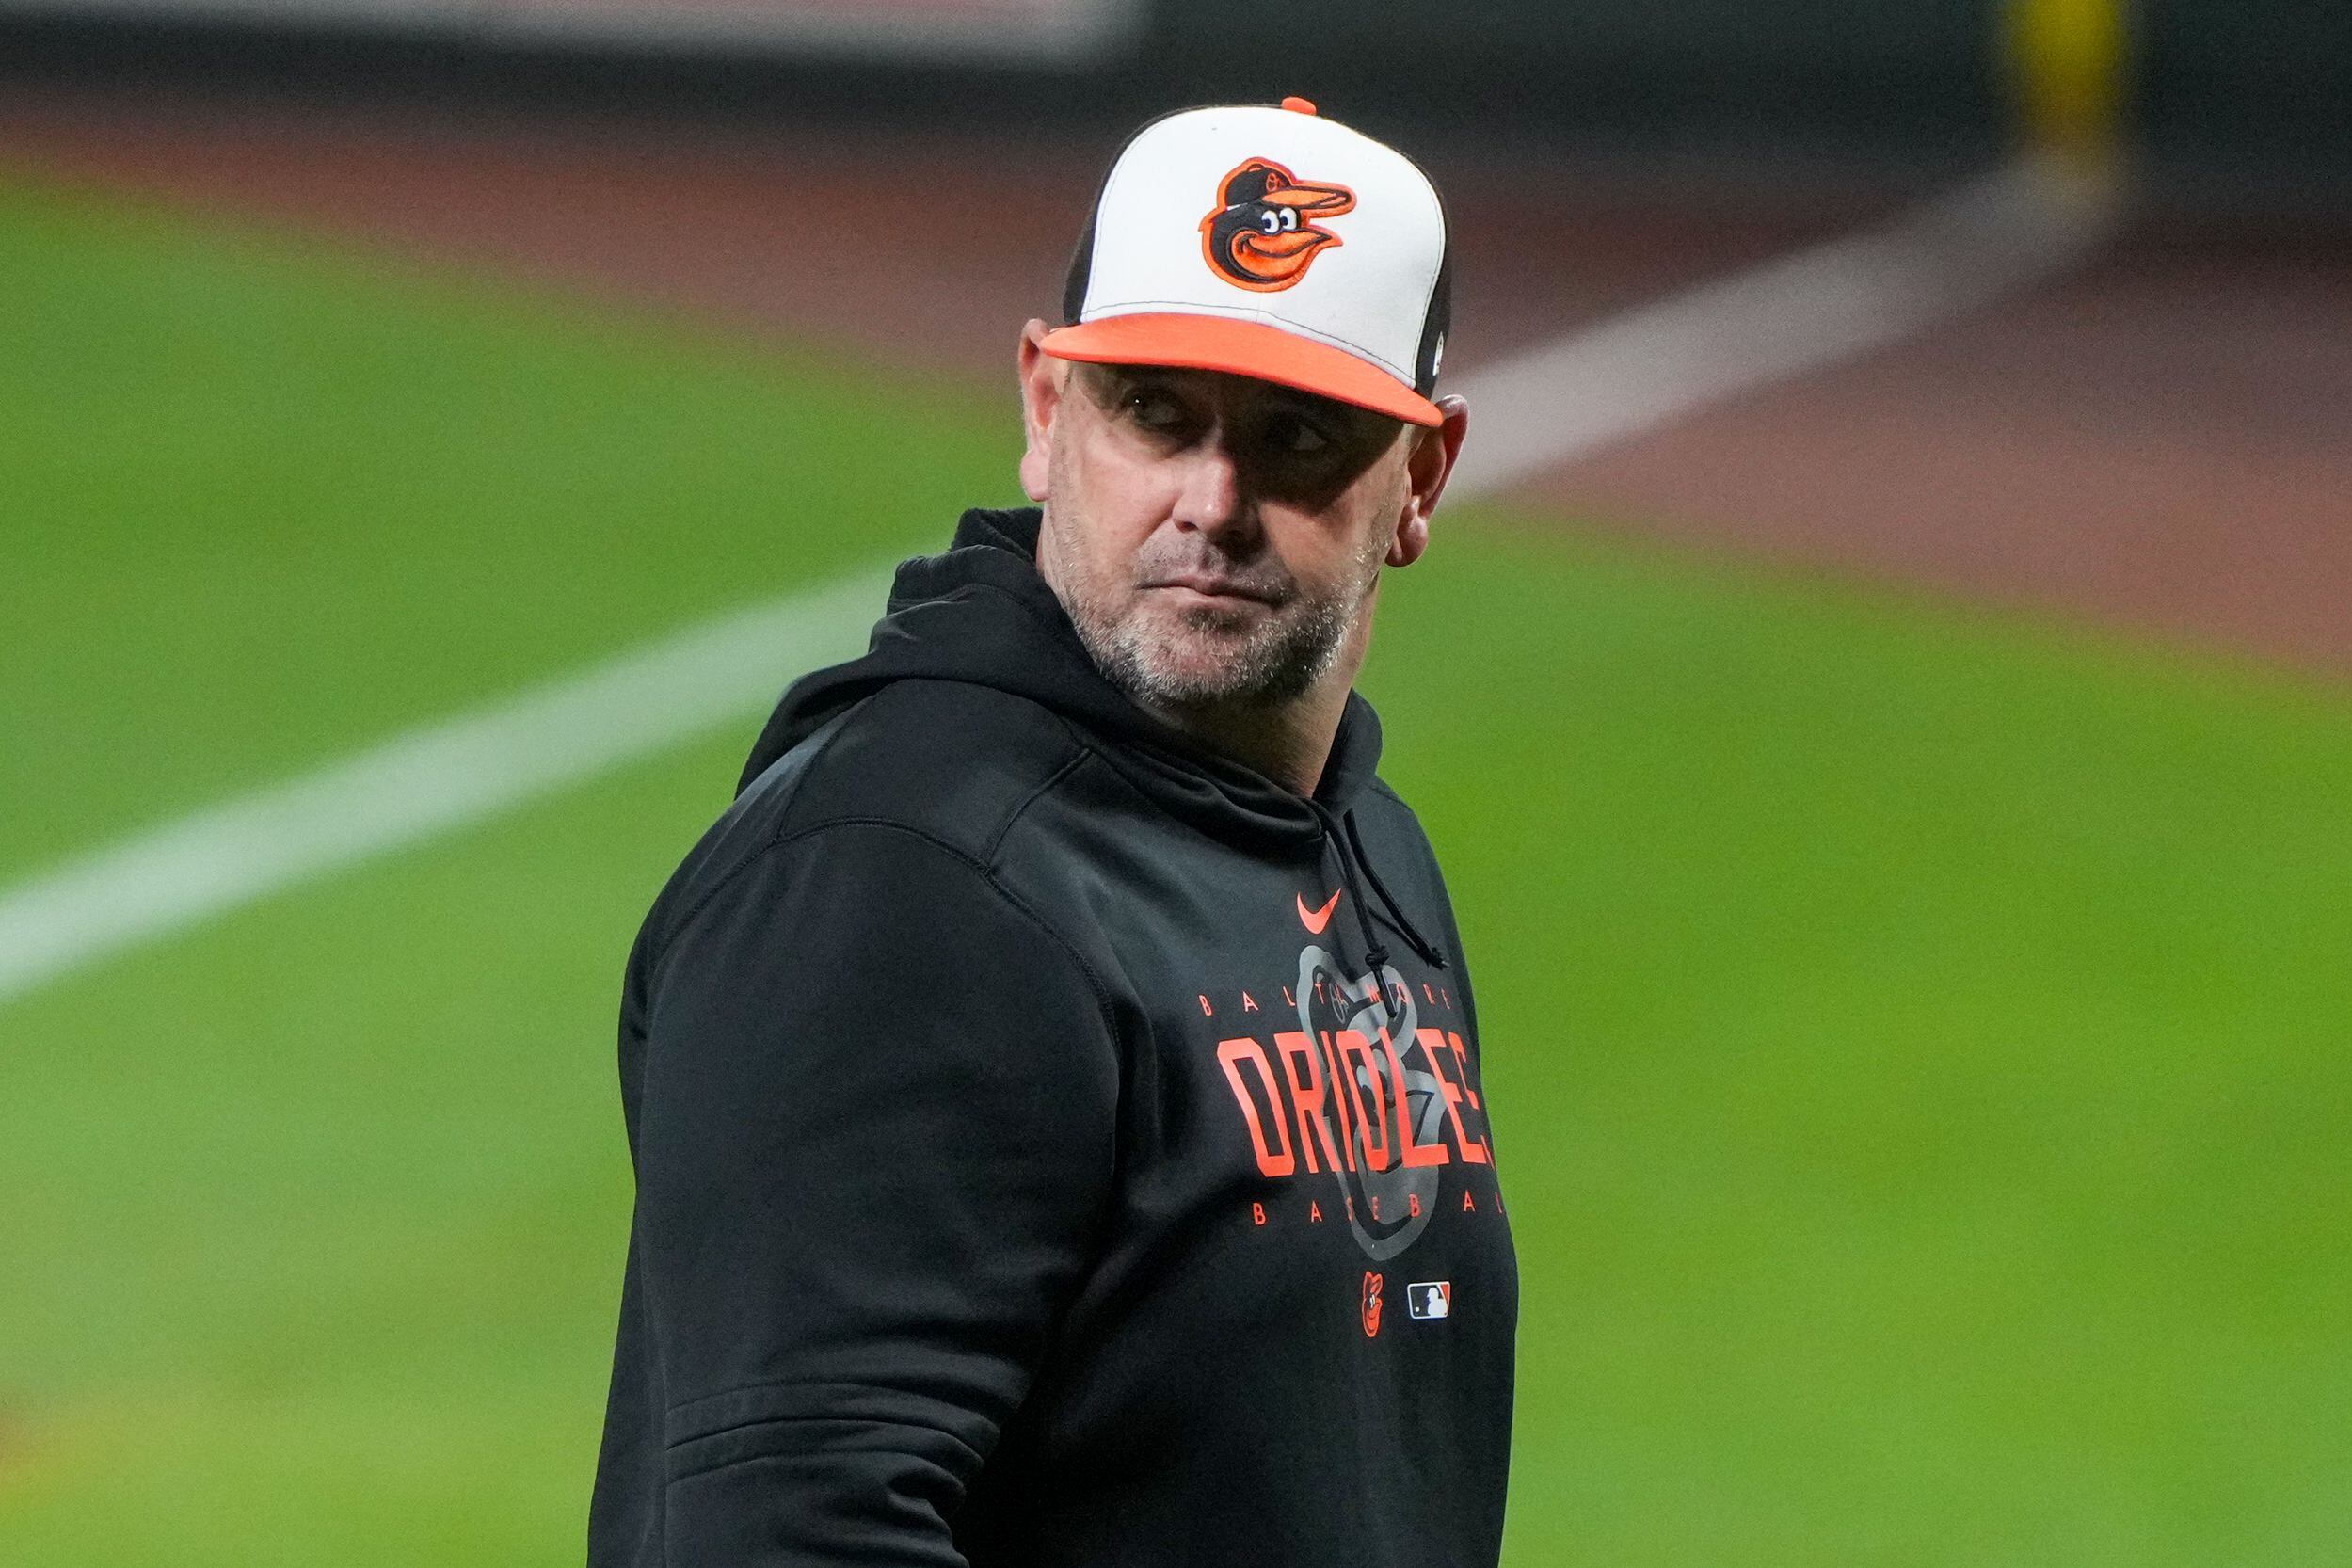 Orioles manager Brandon Hyde named AL Manager of the Year by